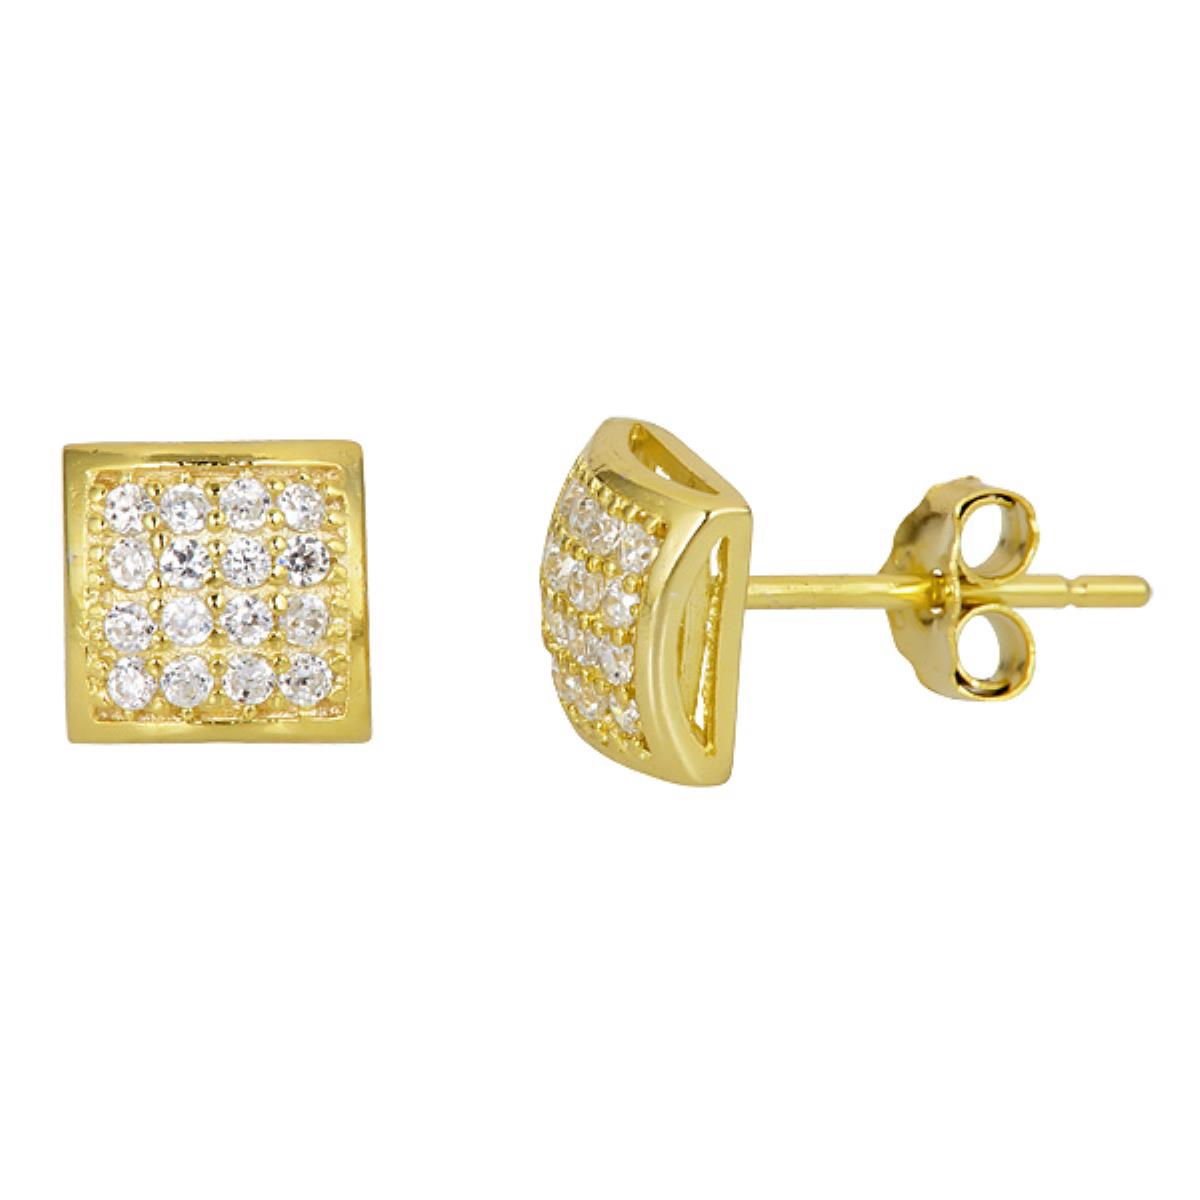 Sterling Silver Yellow 7x7mm Micropave Domed Square Stud Earring